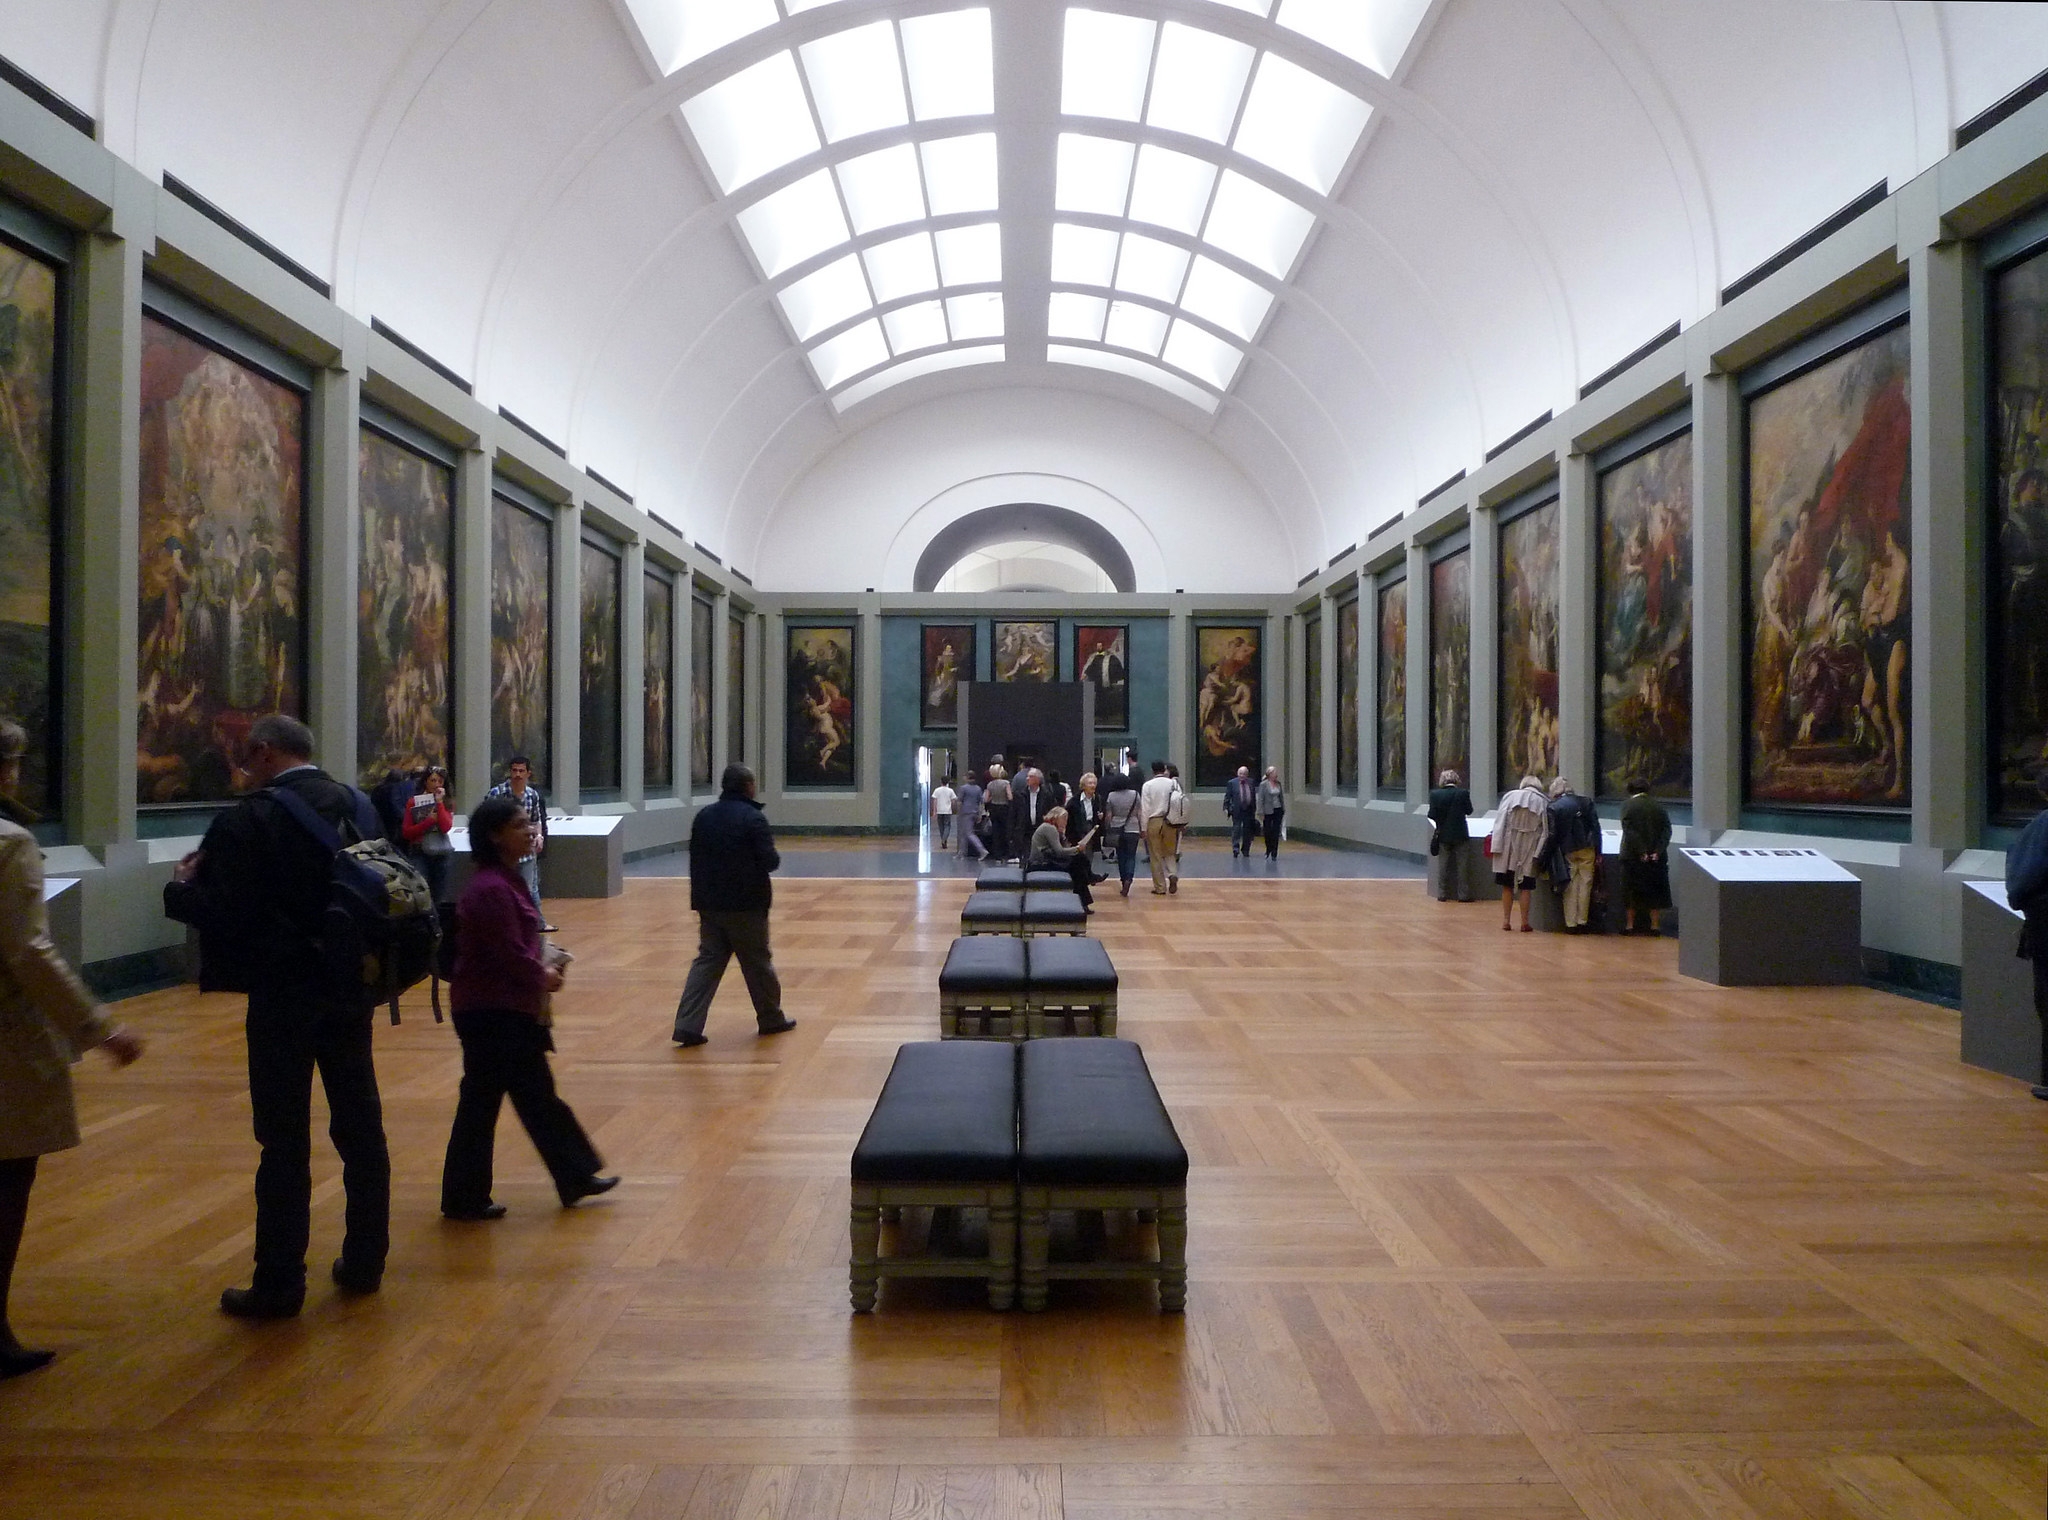 The Medici Cycle paintings in the Musée du Louvre (photo: Dr. Steven Zucker, CC BY-NC-SA 2.0)